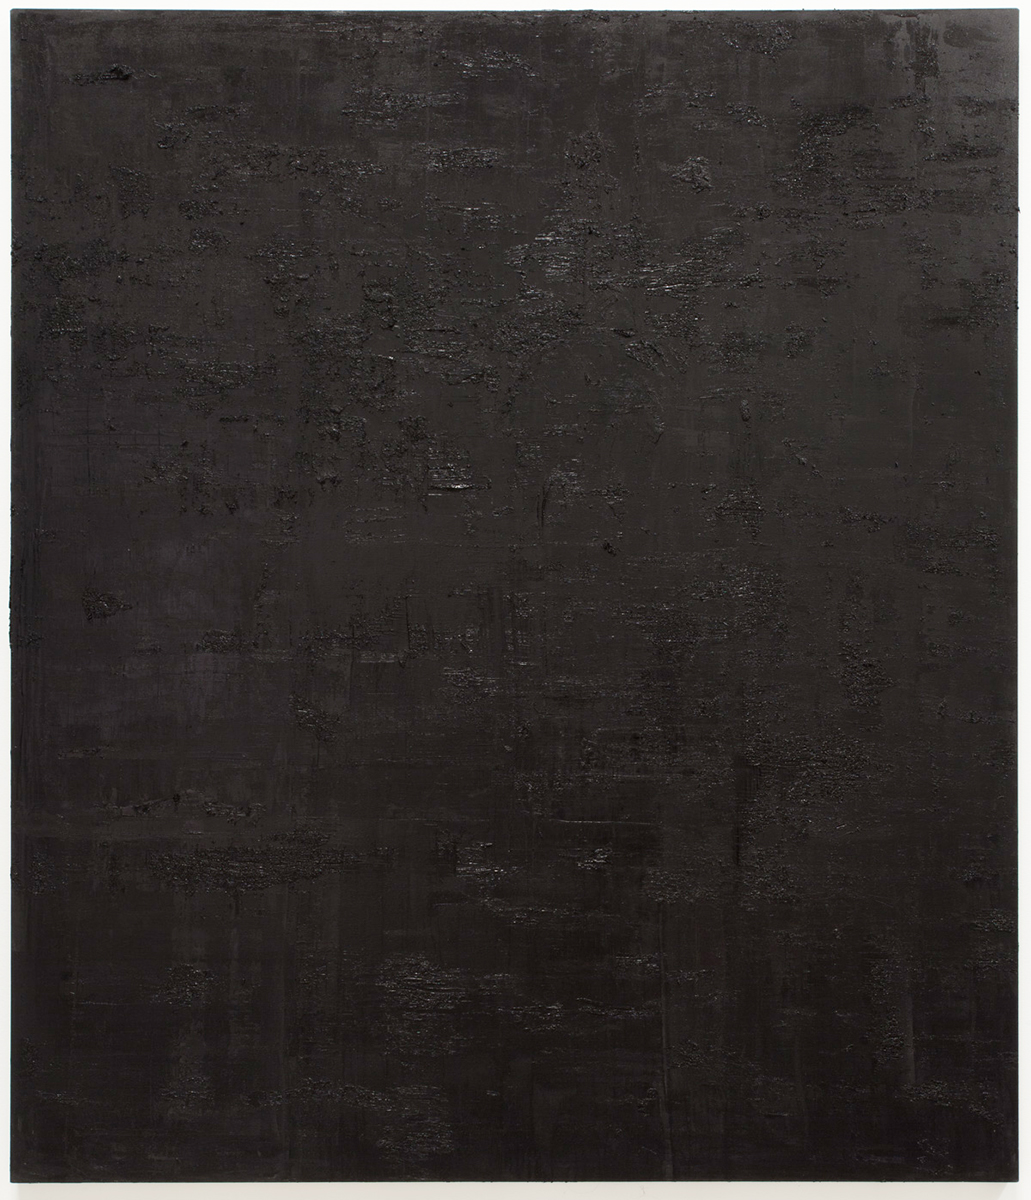  Untitled black monochrome painting (7.10.PBk9.CI77267/PBk11.Fe3O4) from the Frequency10. series. Oil, grit, graphite on canvas, 213.36cm x 182.88cm (84 inches x 72 inches), 2016-2017.    